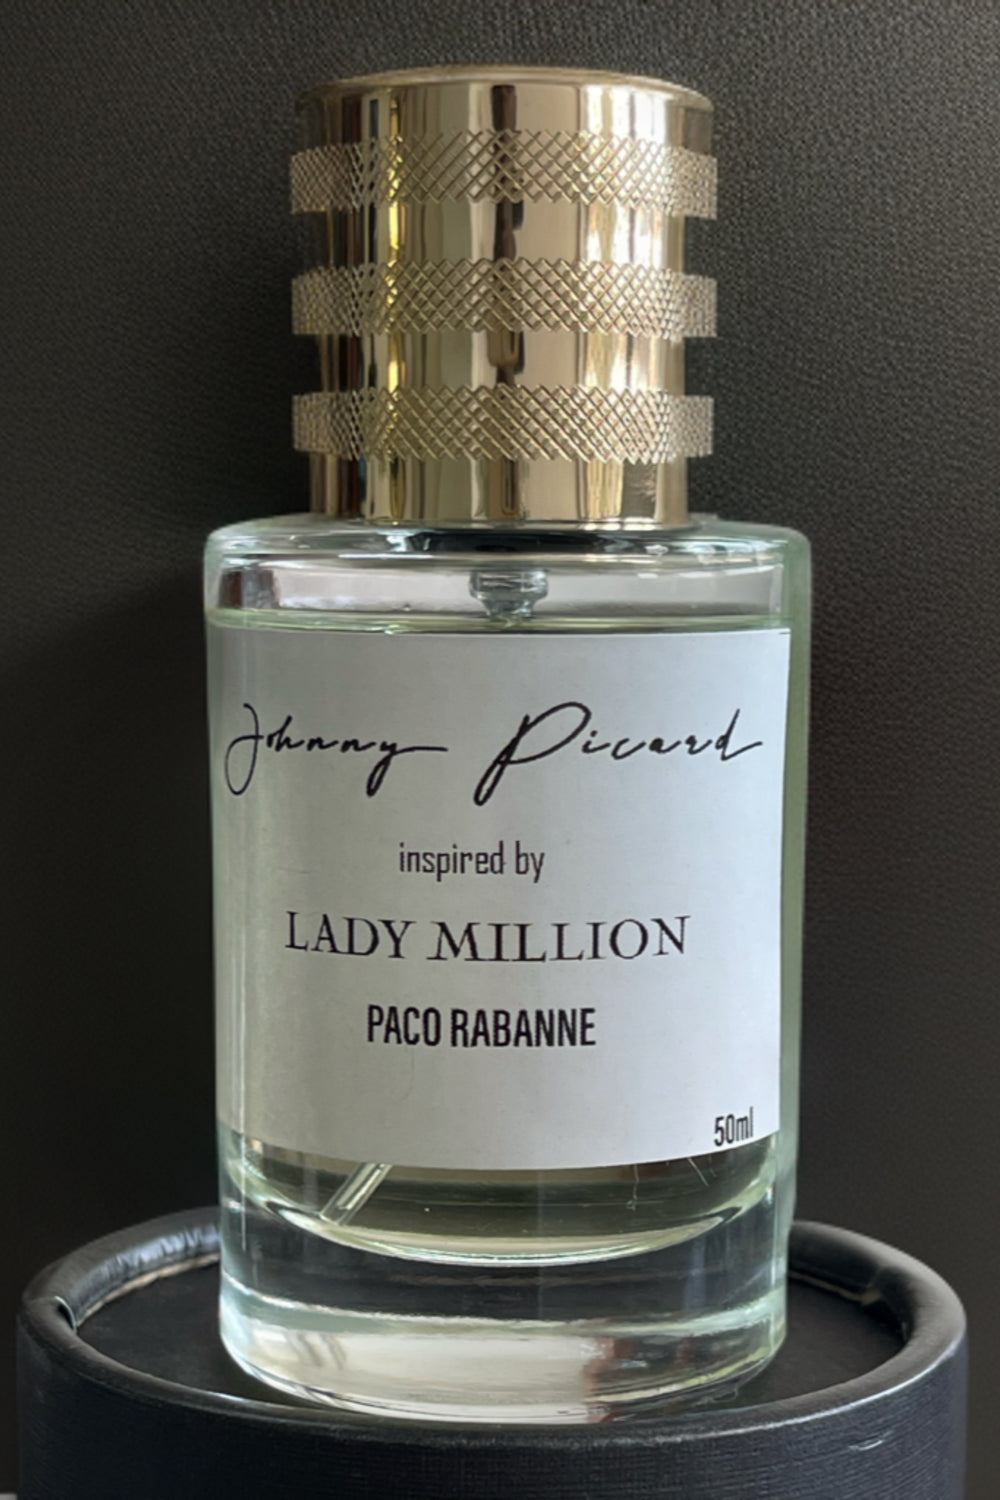 johnny picard inspired by lady milion  PACO RABANNE